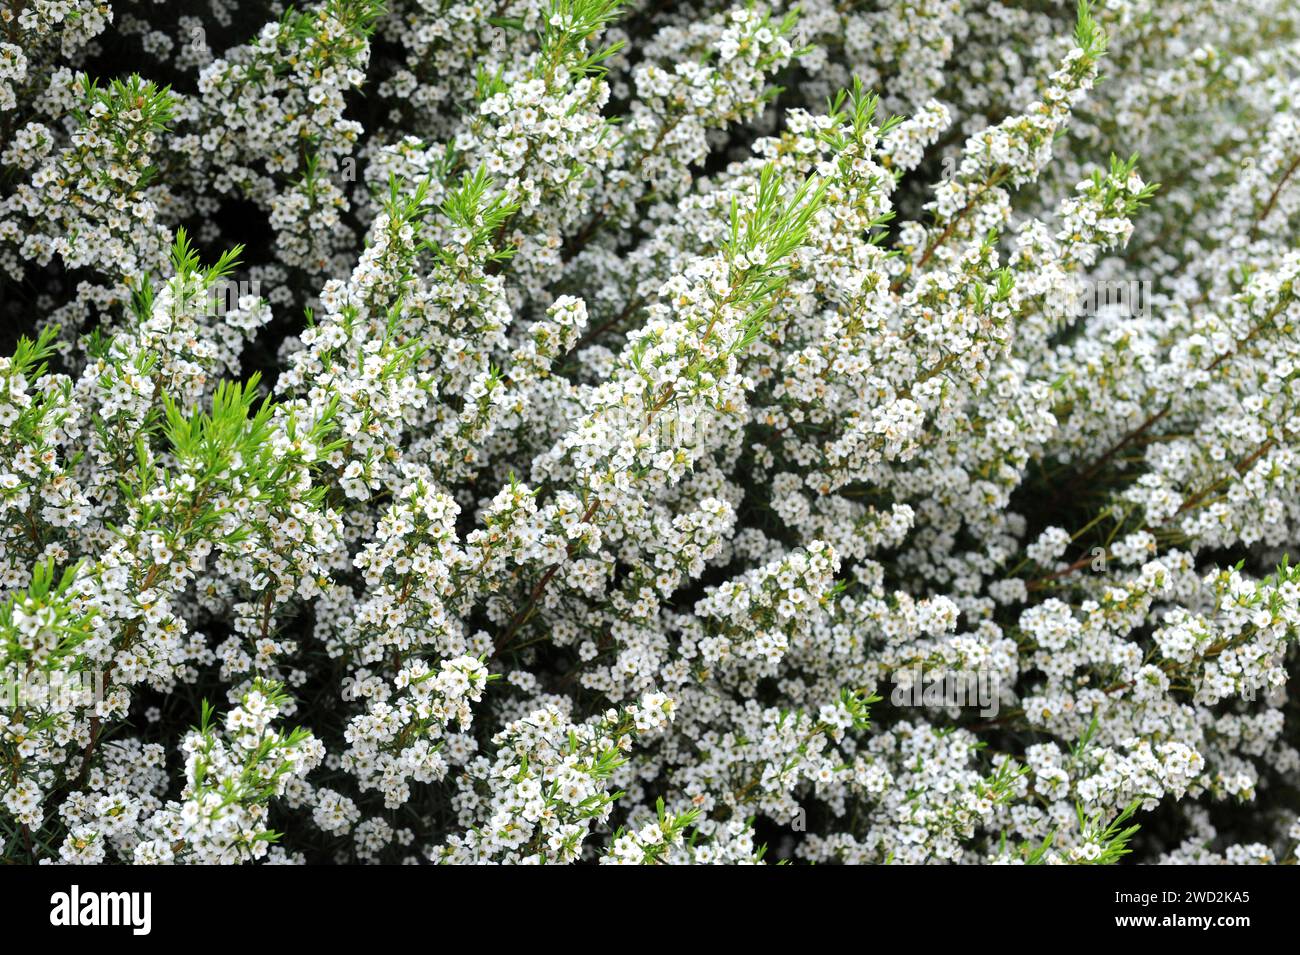 White confetti bush (Coleonema album) is a compact shrub native to South Africa. Flowers and leaves detail. Stock Photo